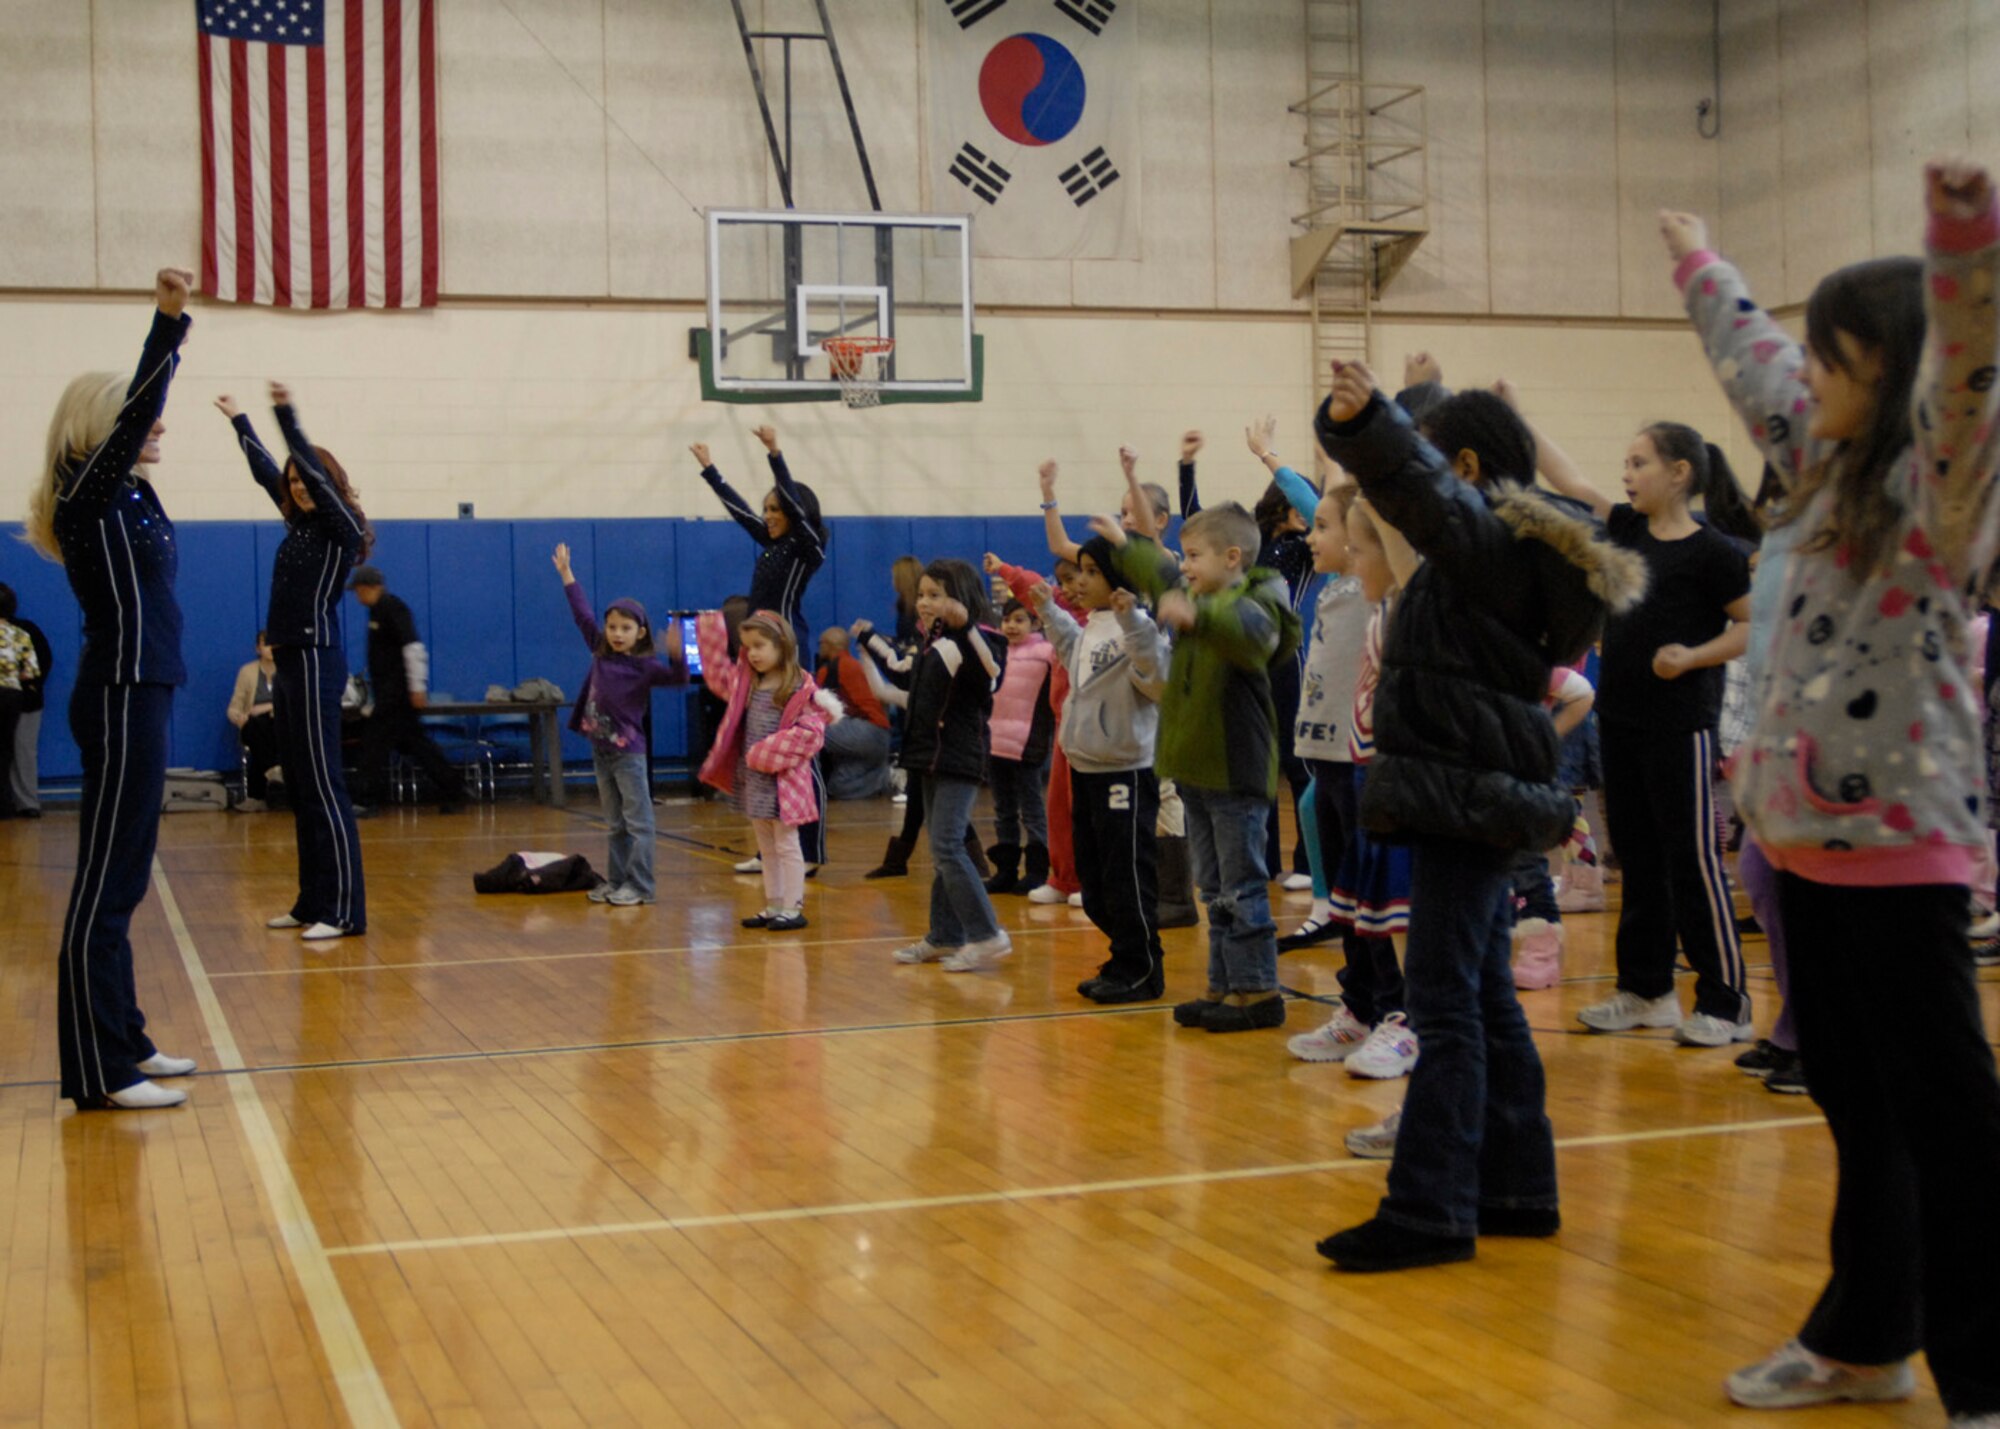 Dallas Cowboys Cheerleaders participate in a free cheer clinic for Team Osan family members at the Youth Center during a base visit Dec. 29. (U.S. Air Force photo/1st Lt. Cody Chiles)